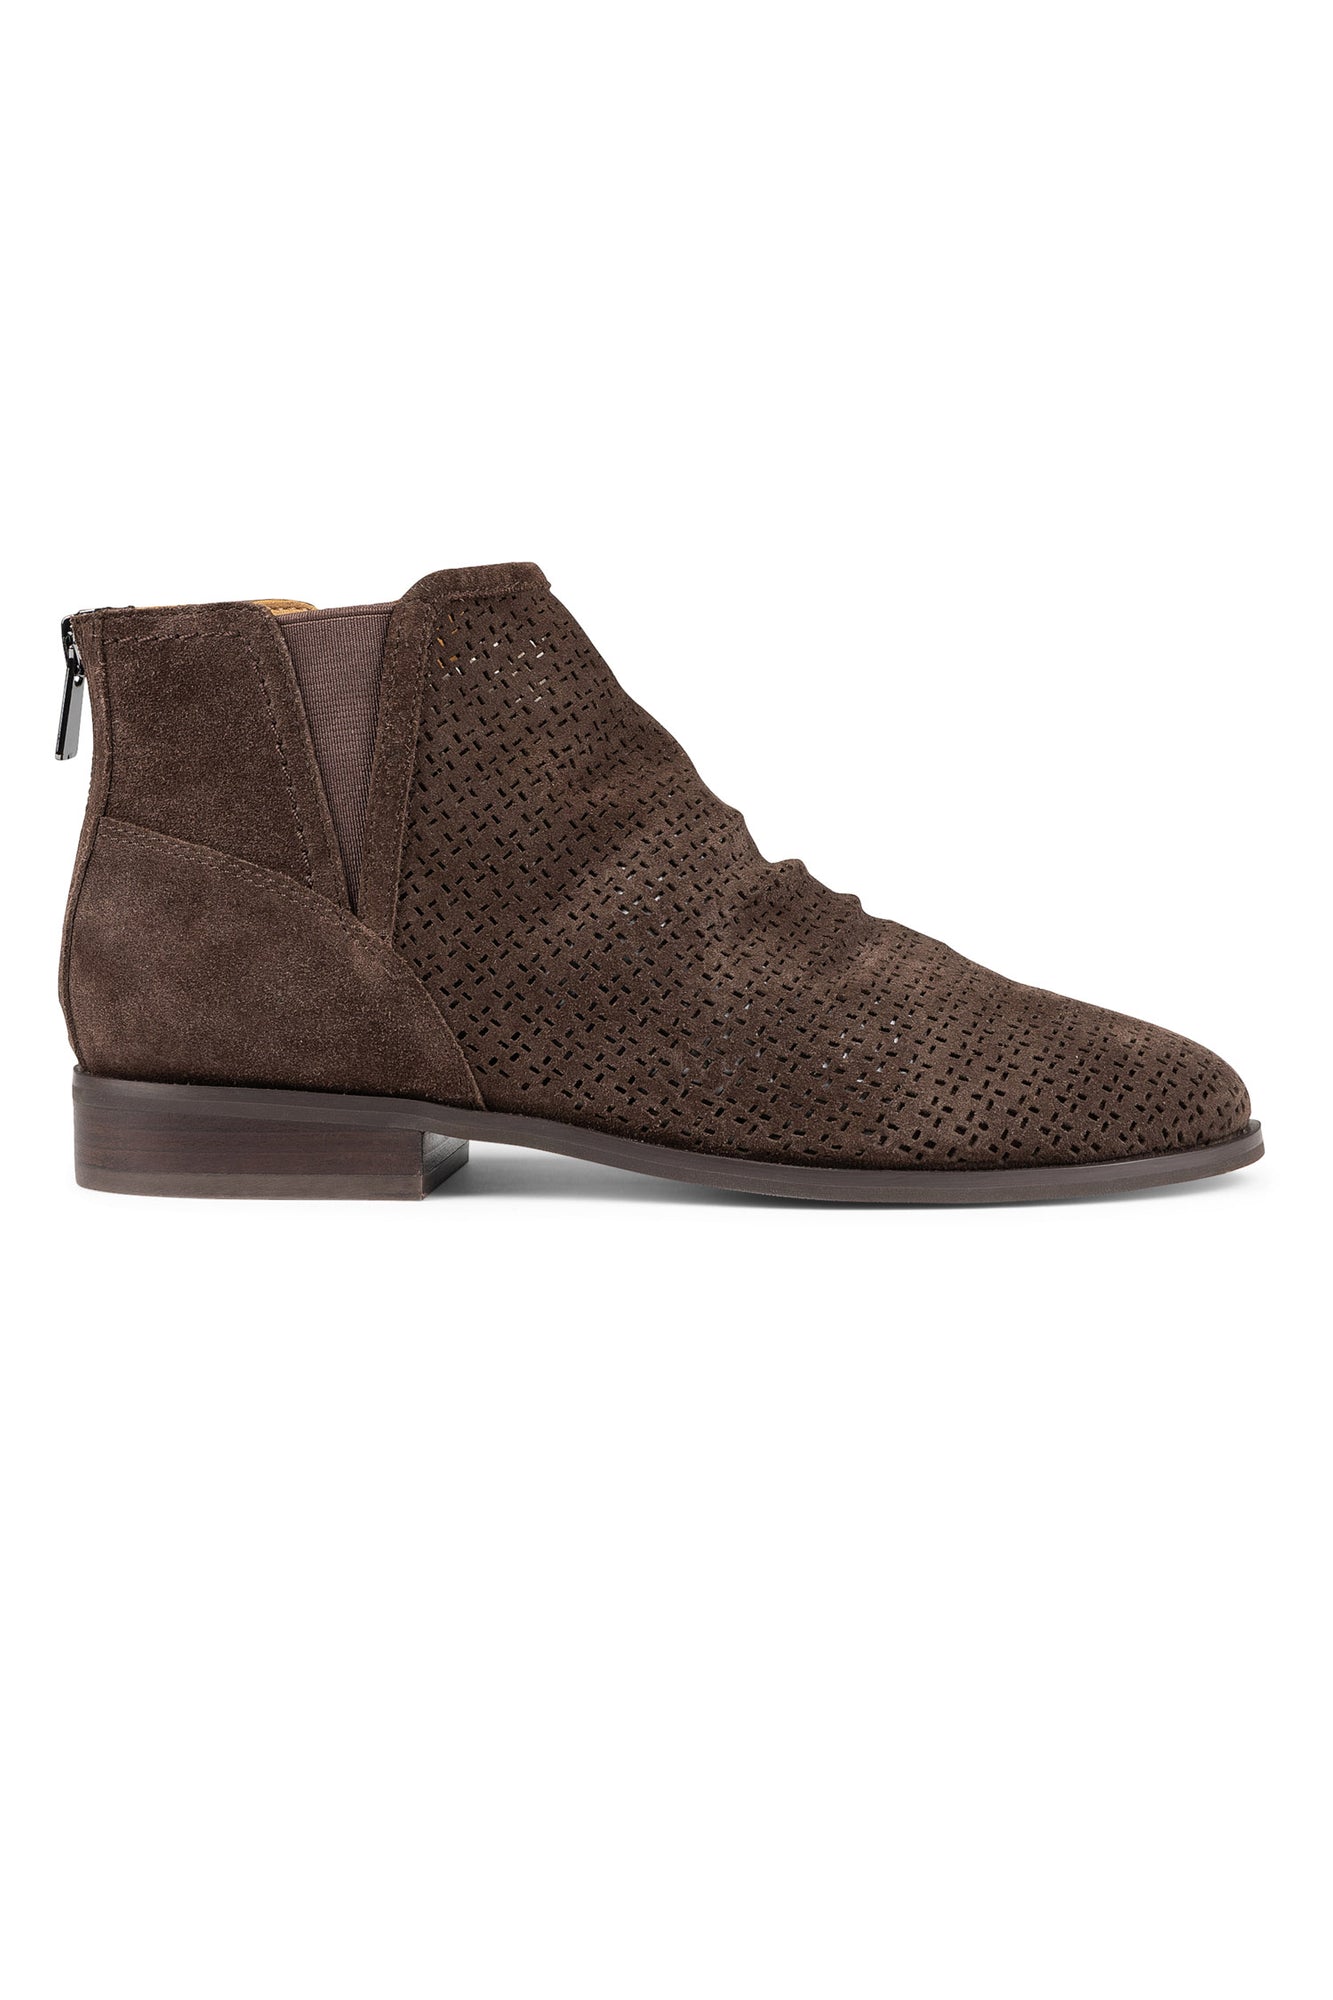 NYDJ Concetta Booties In Perforated Suede - Coffee